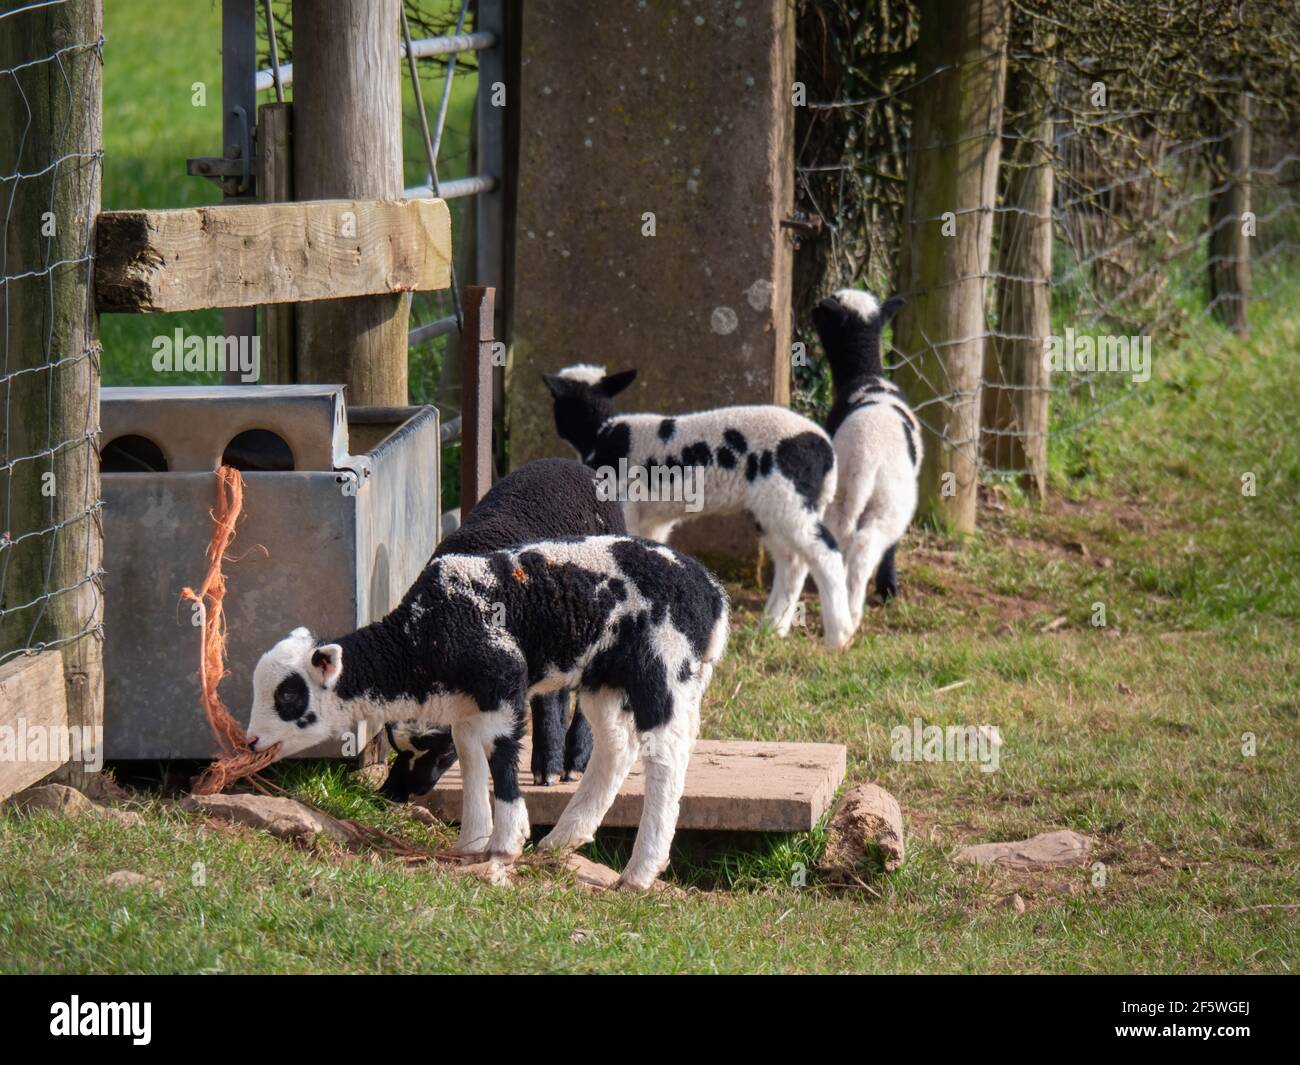 Piebald black and white lambs, probably Jacob breed sheep in field. UK. Stock Photo